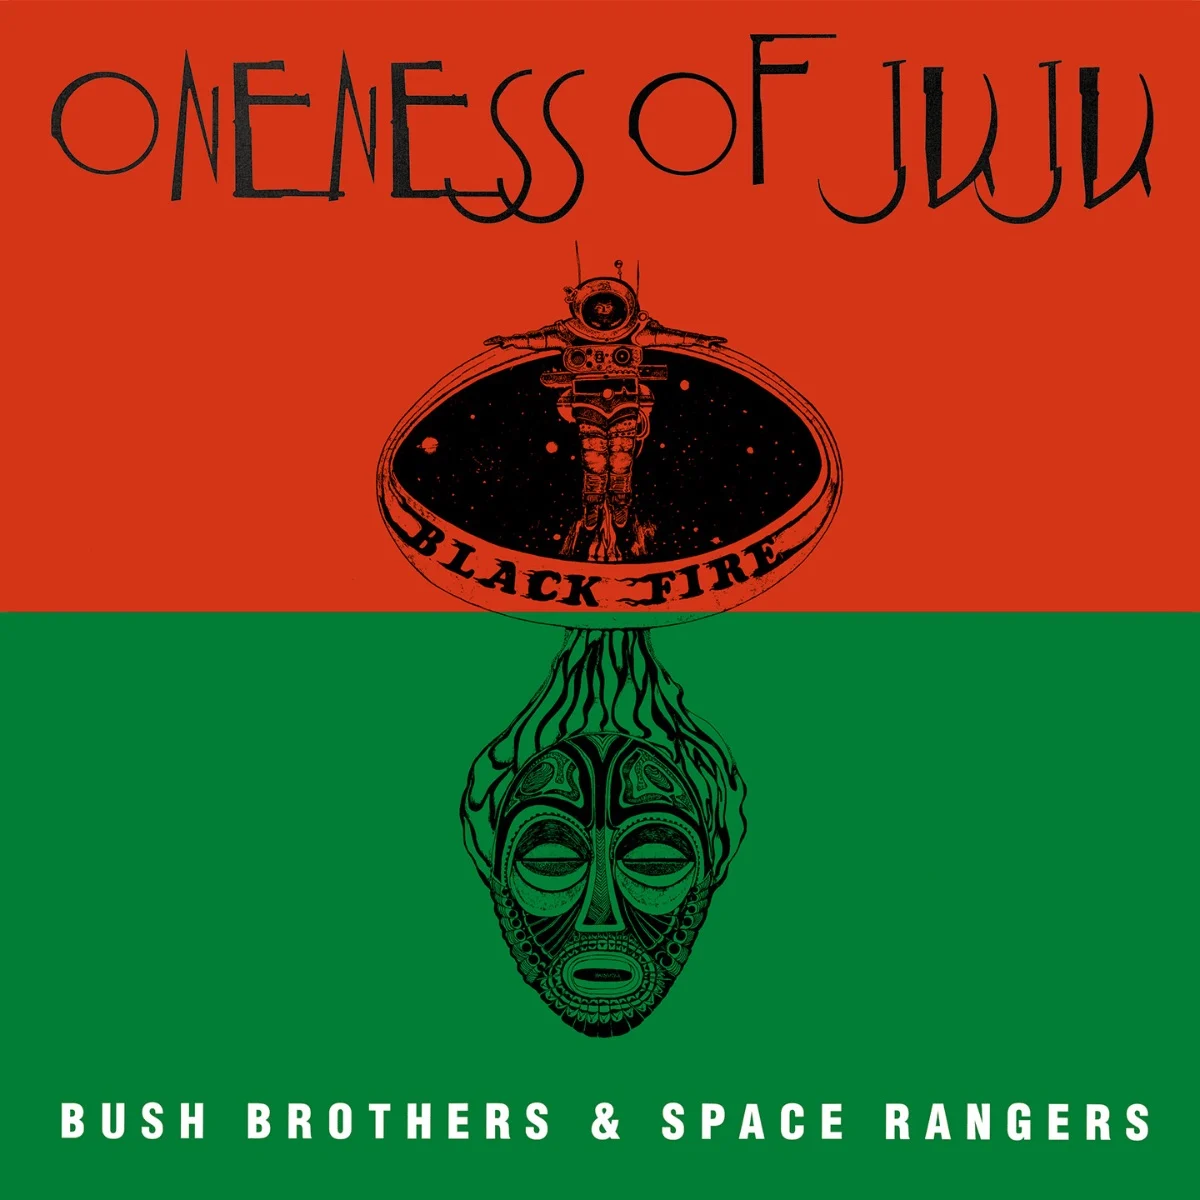 Bush Brothers & Space Rangers (pre-order due 13th May)